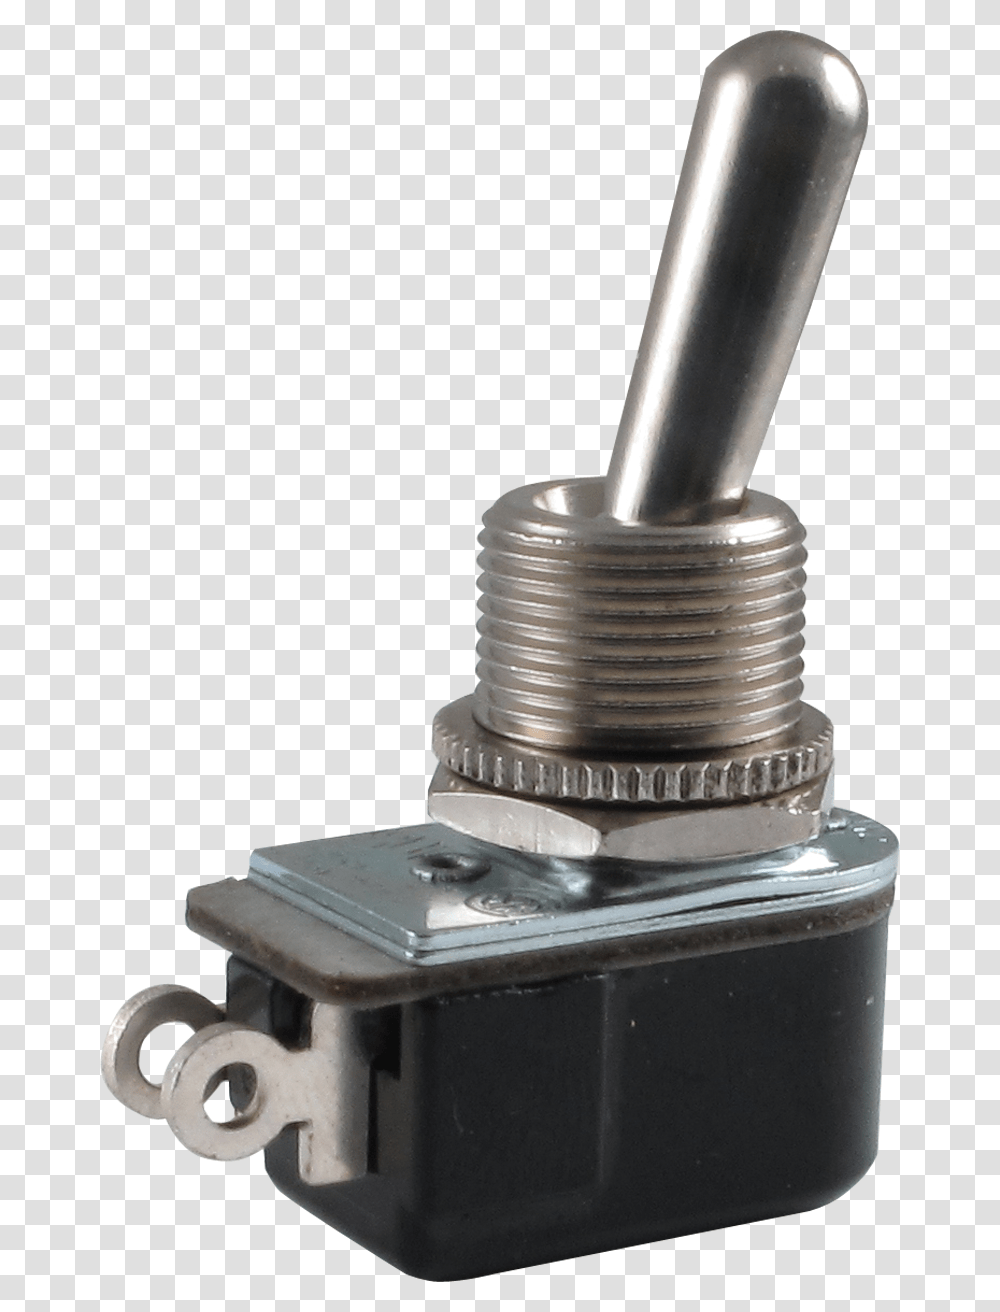 Tool, Electrical Device, Switch, Mixer, Appliance Transparent Png